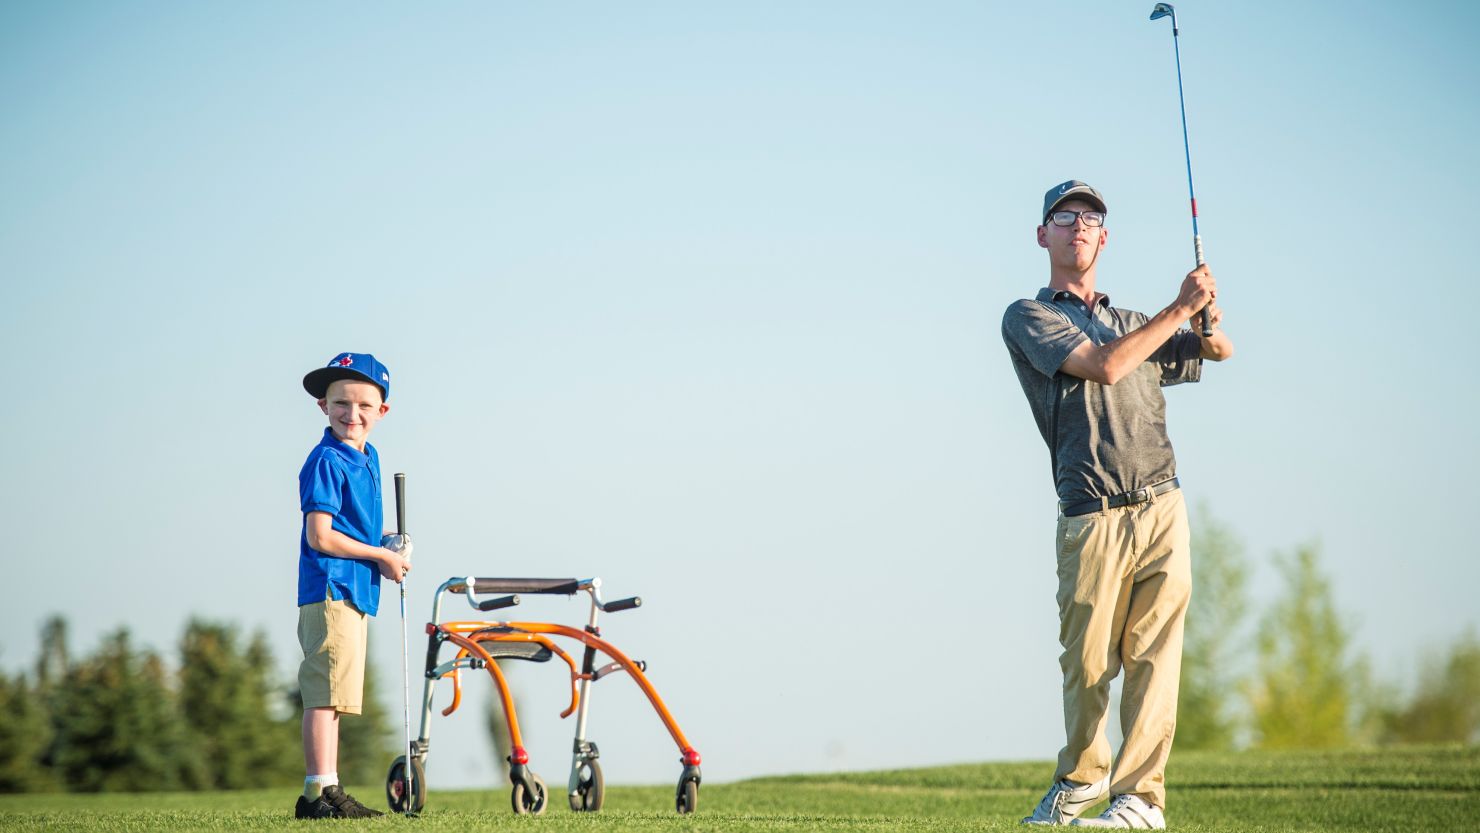 Kyle Miller hasn't let cerebral palsy get in the way of his golf dreams 